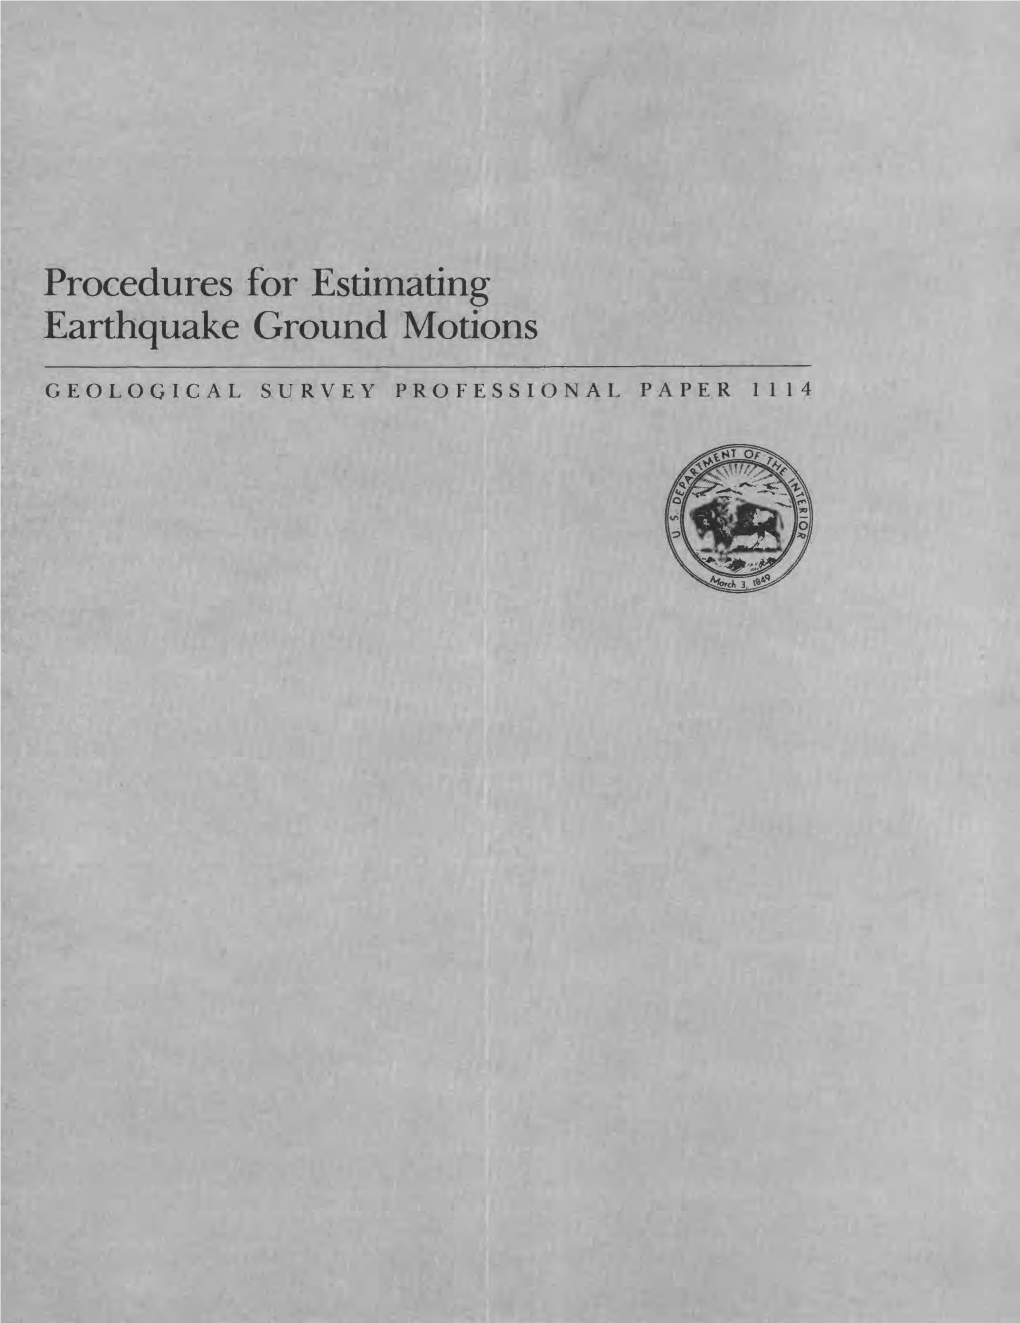 Procedures for Estimating Earthquake Ground Motions